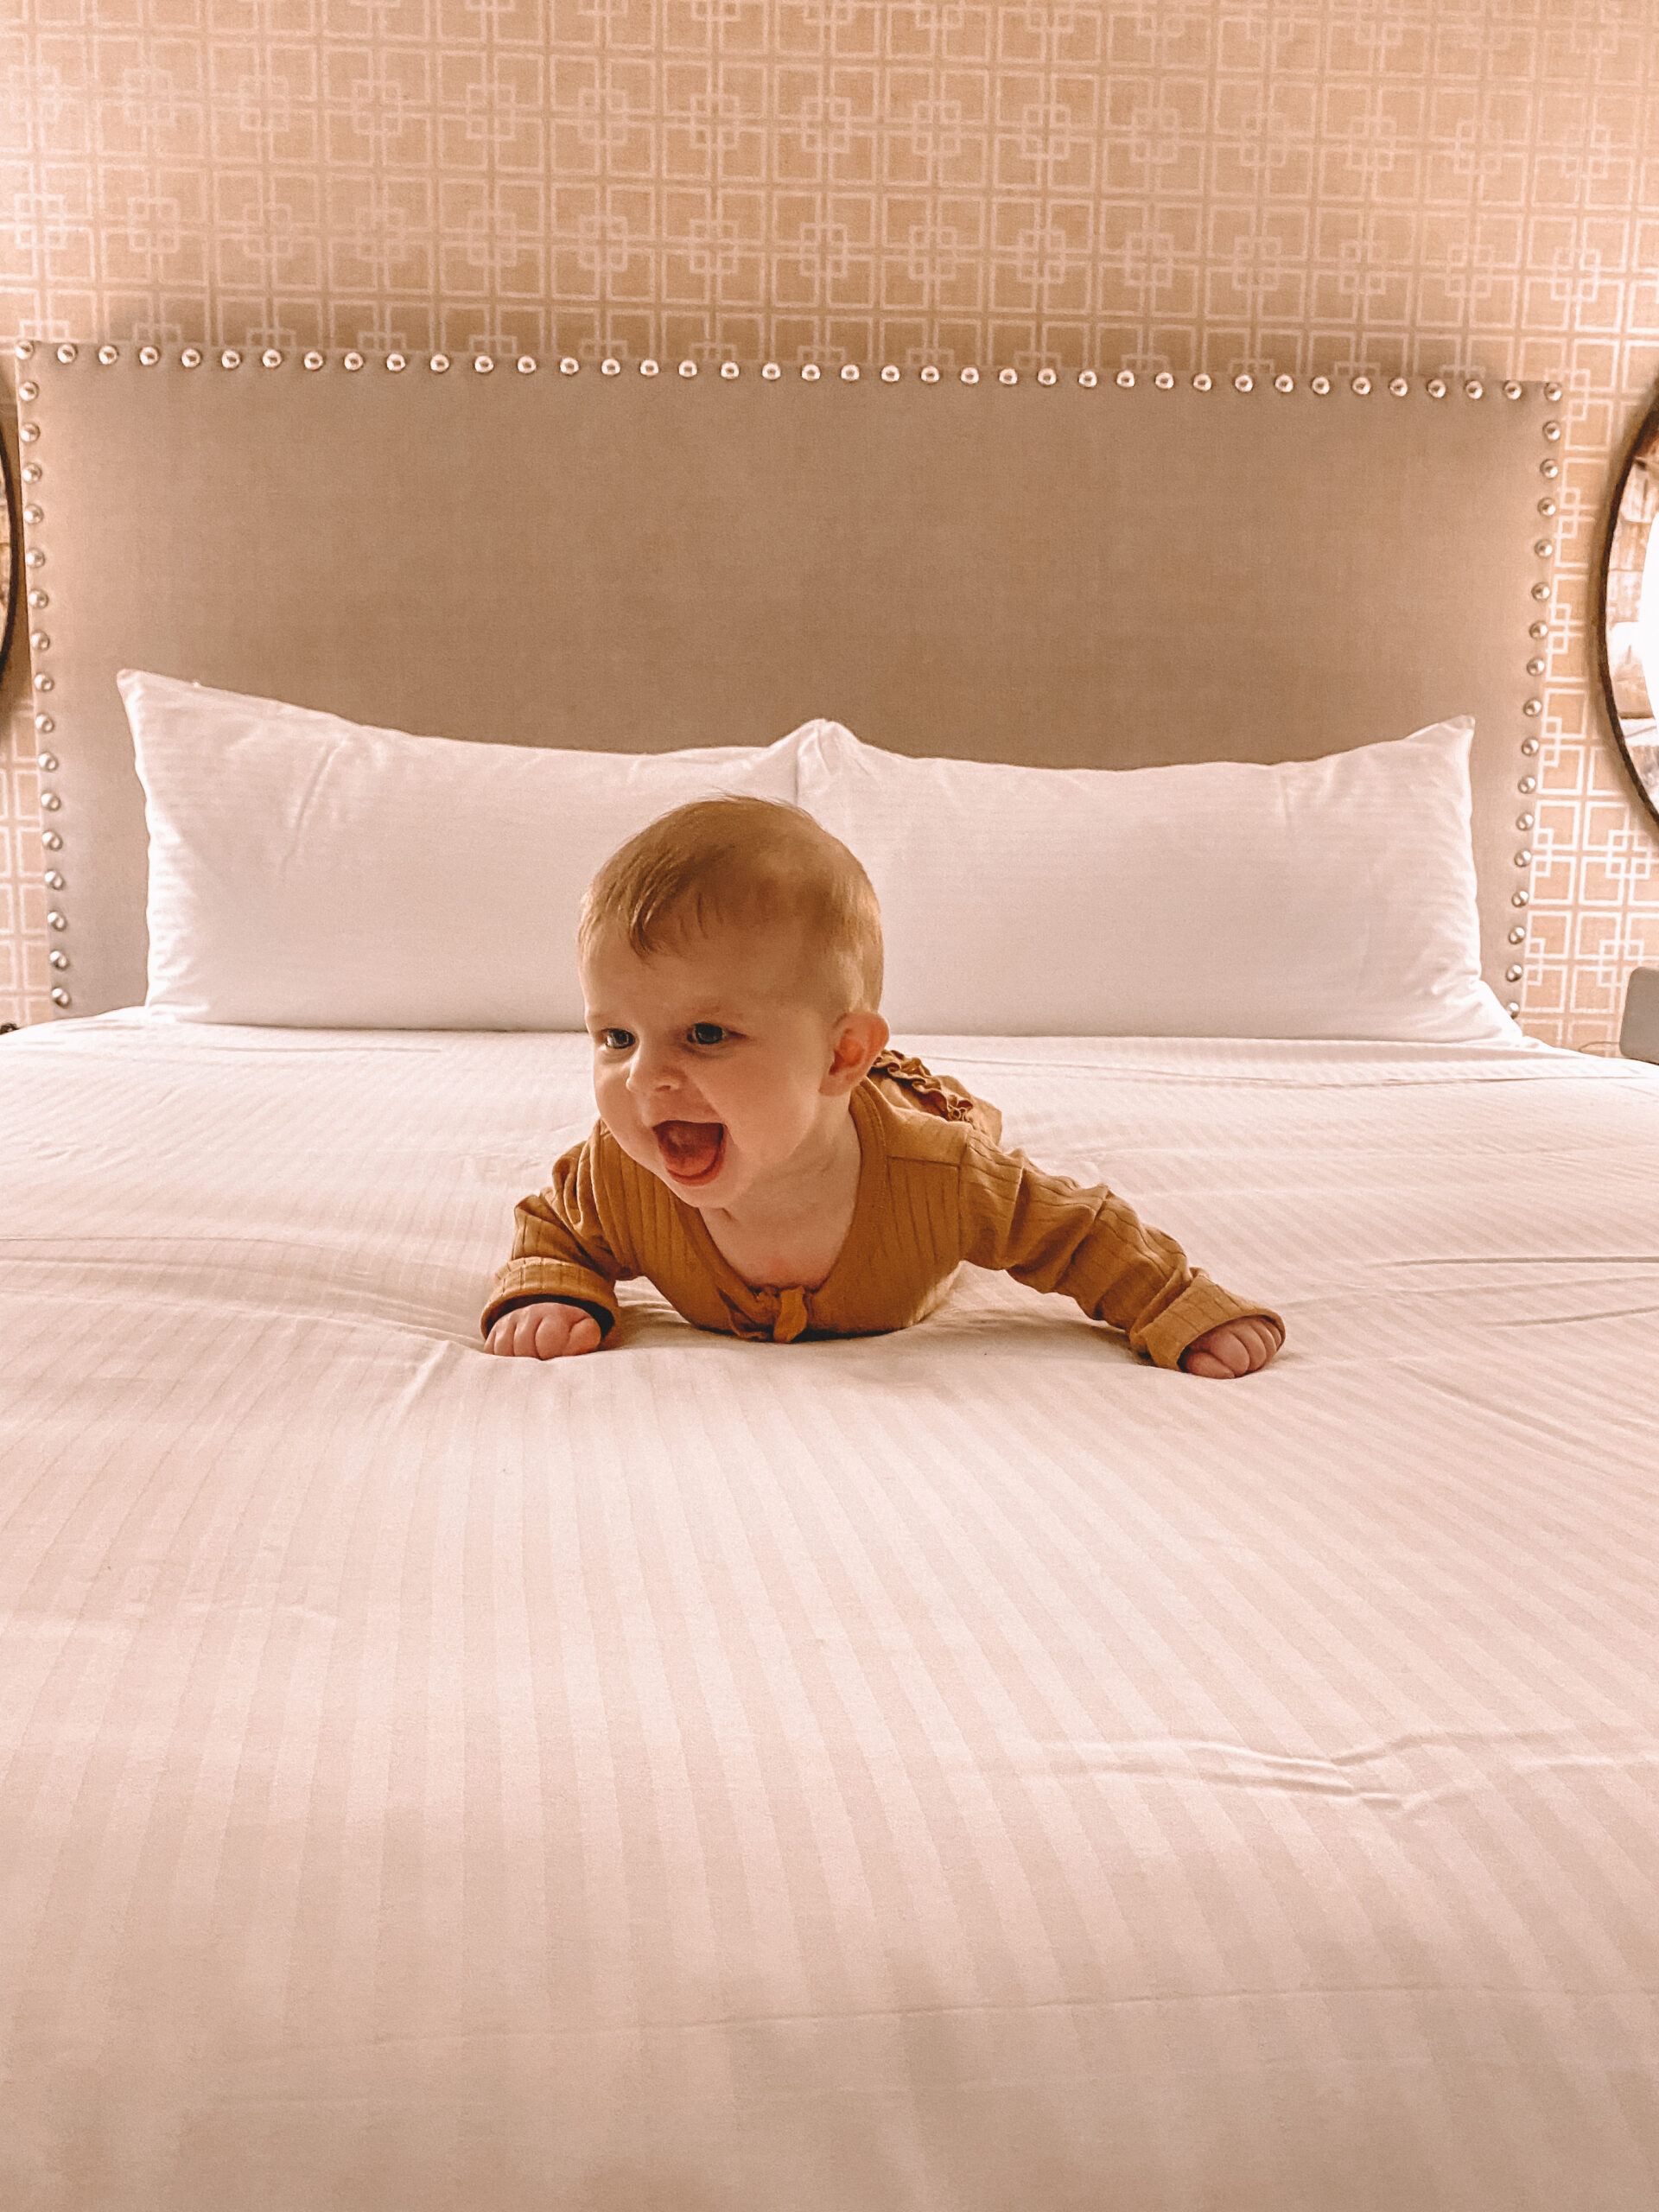 7 tips to survive a hotel with a baby